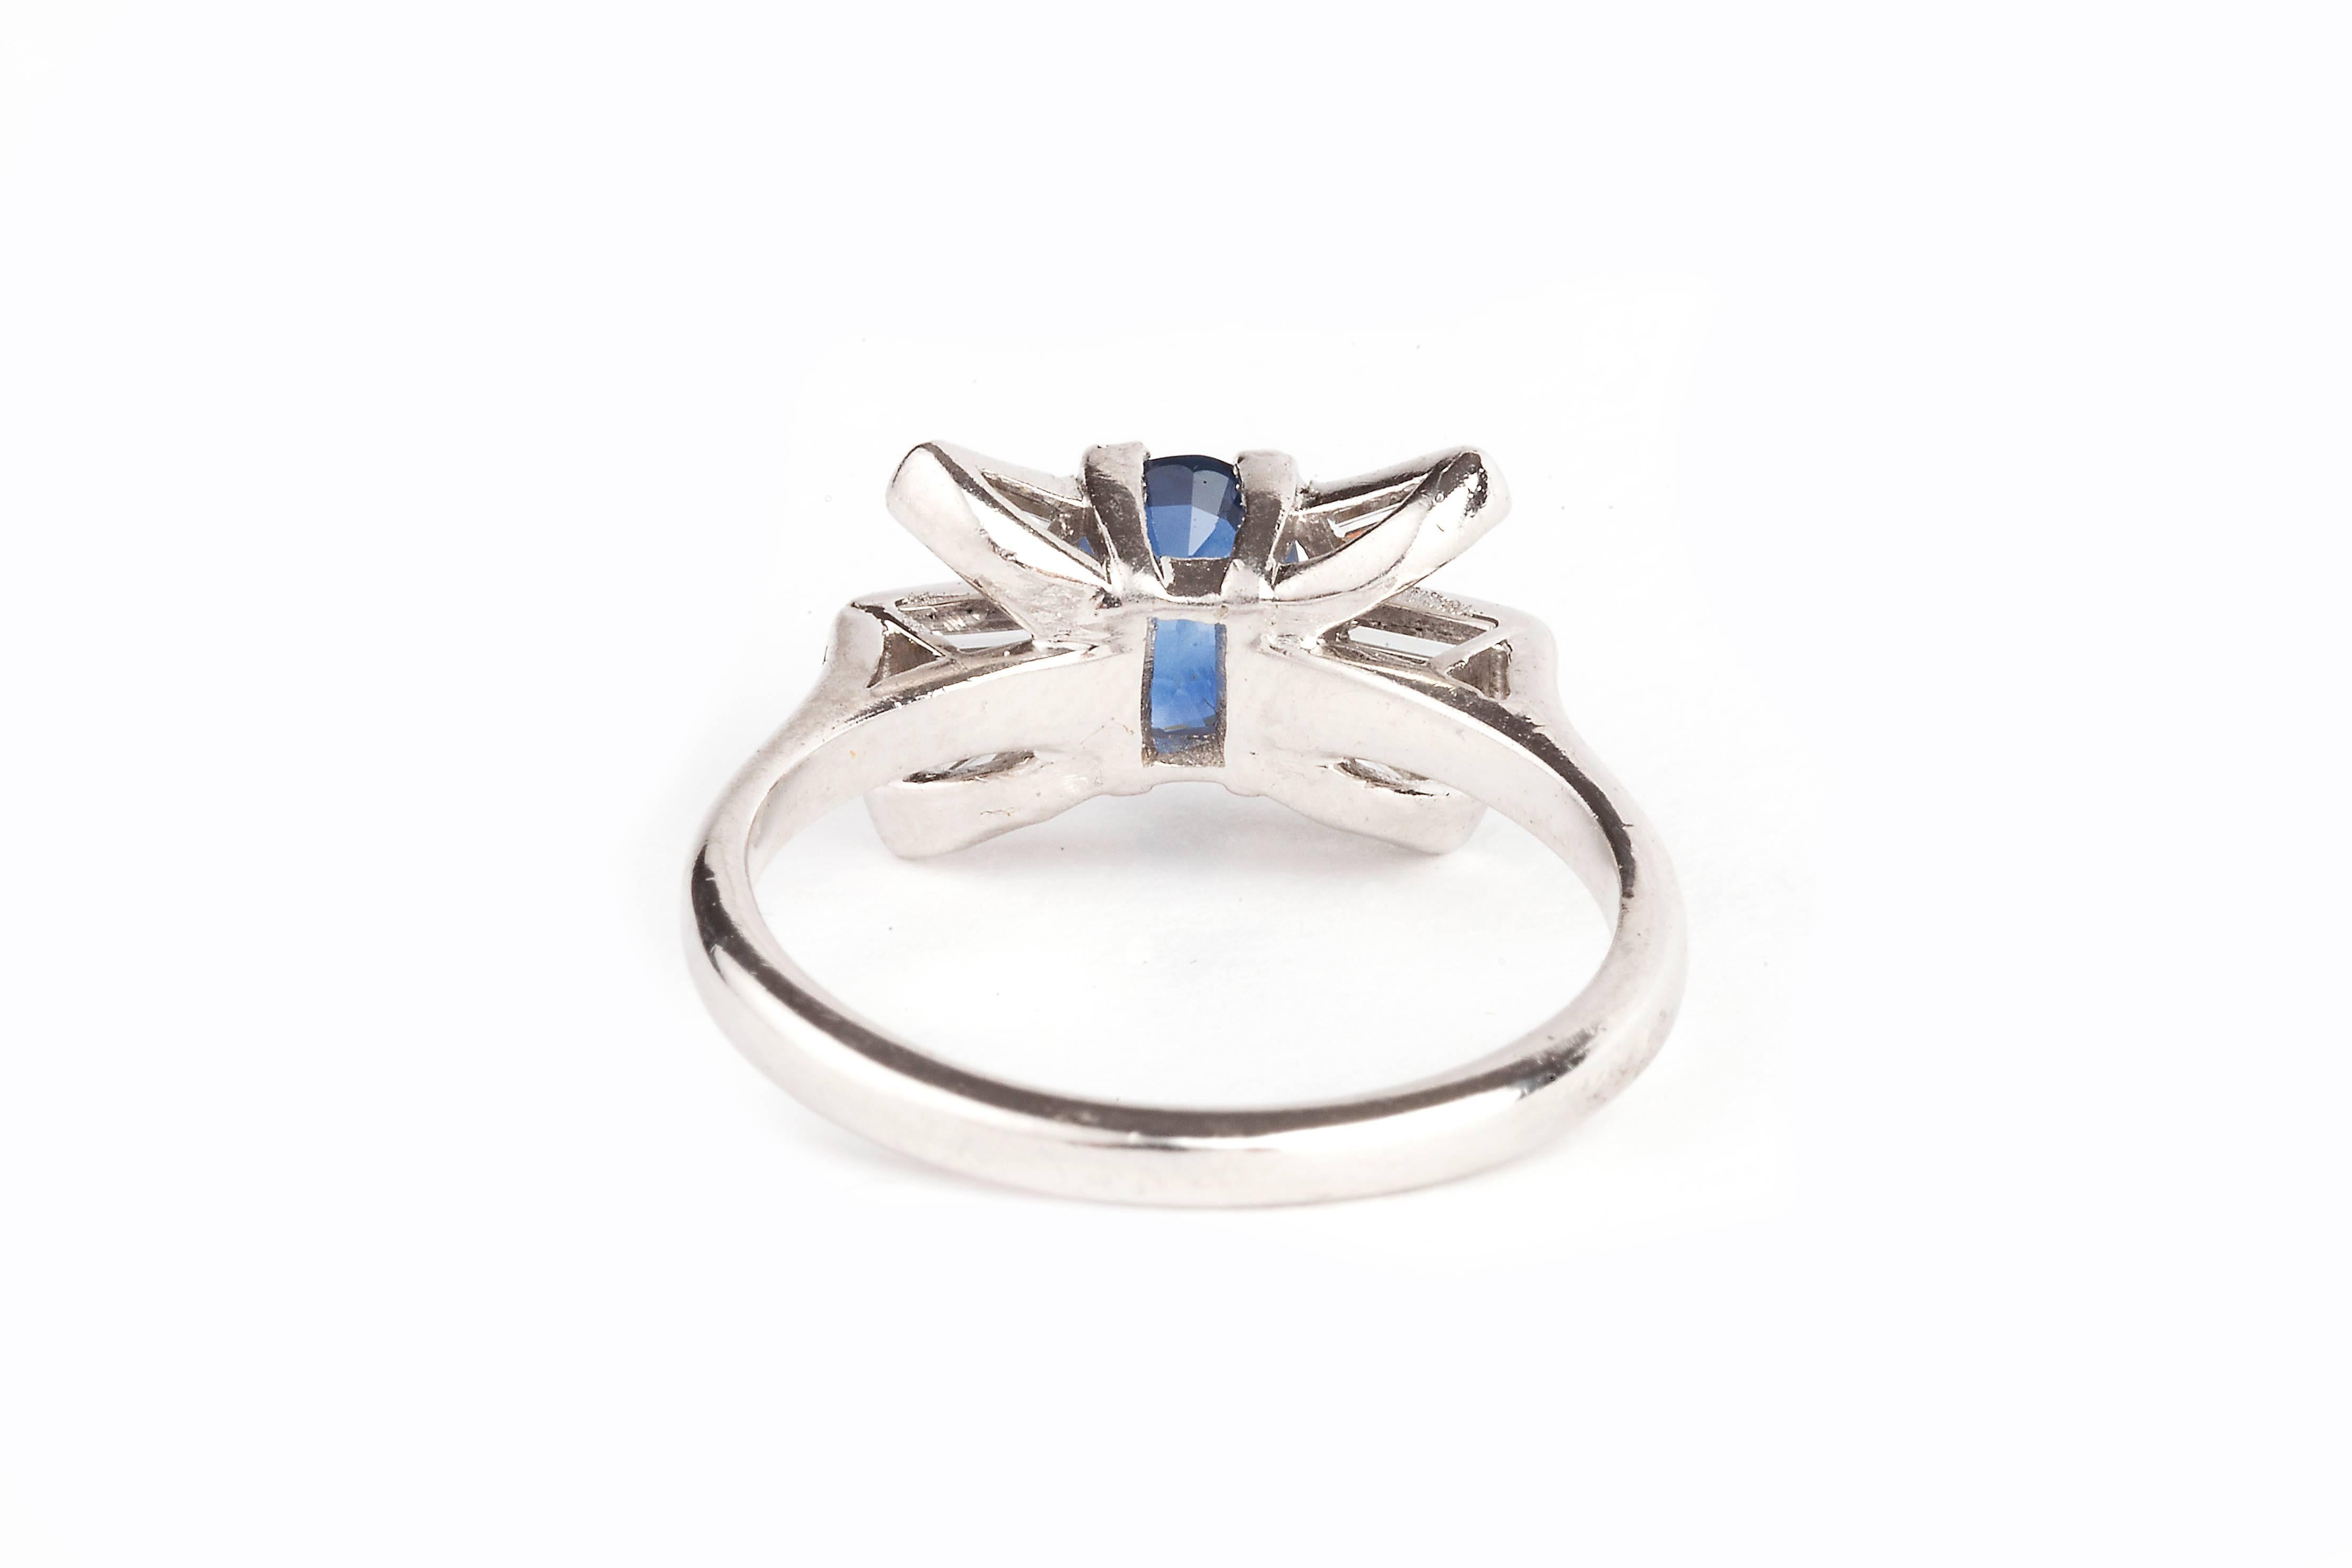 An art deco natural cornflower blue sapphire and diamond ring set in platinum.  The sapphire has a very good colour and is a natural sapphire, it is set with six baguette diamonds and hallmarked 'plat' inside the ring.  The ring dates from about